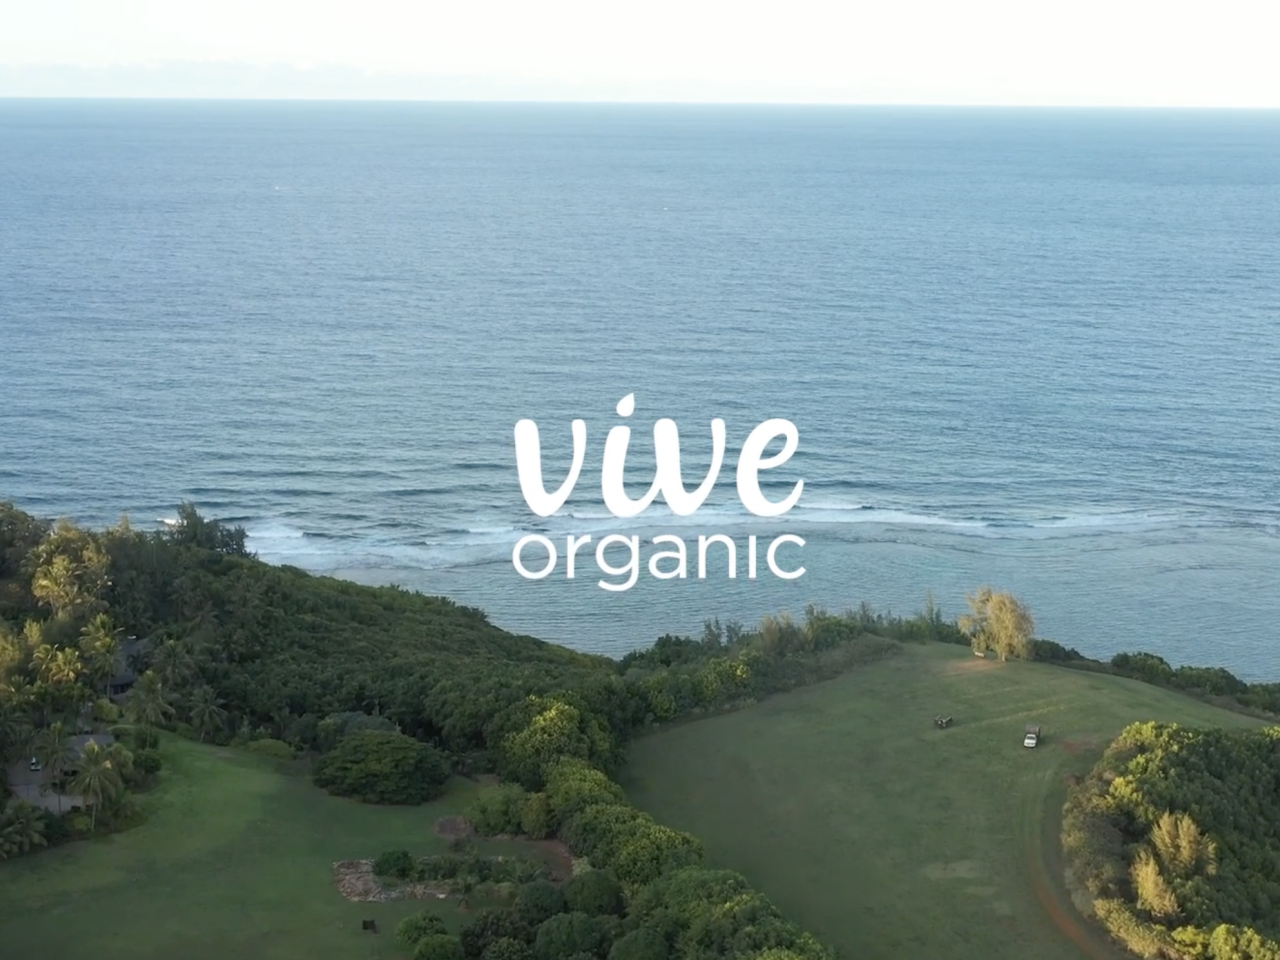 vive organic with ocean background